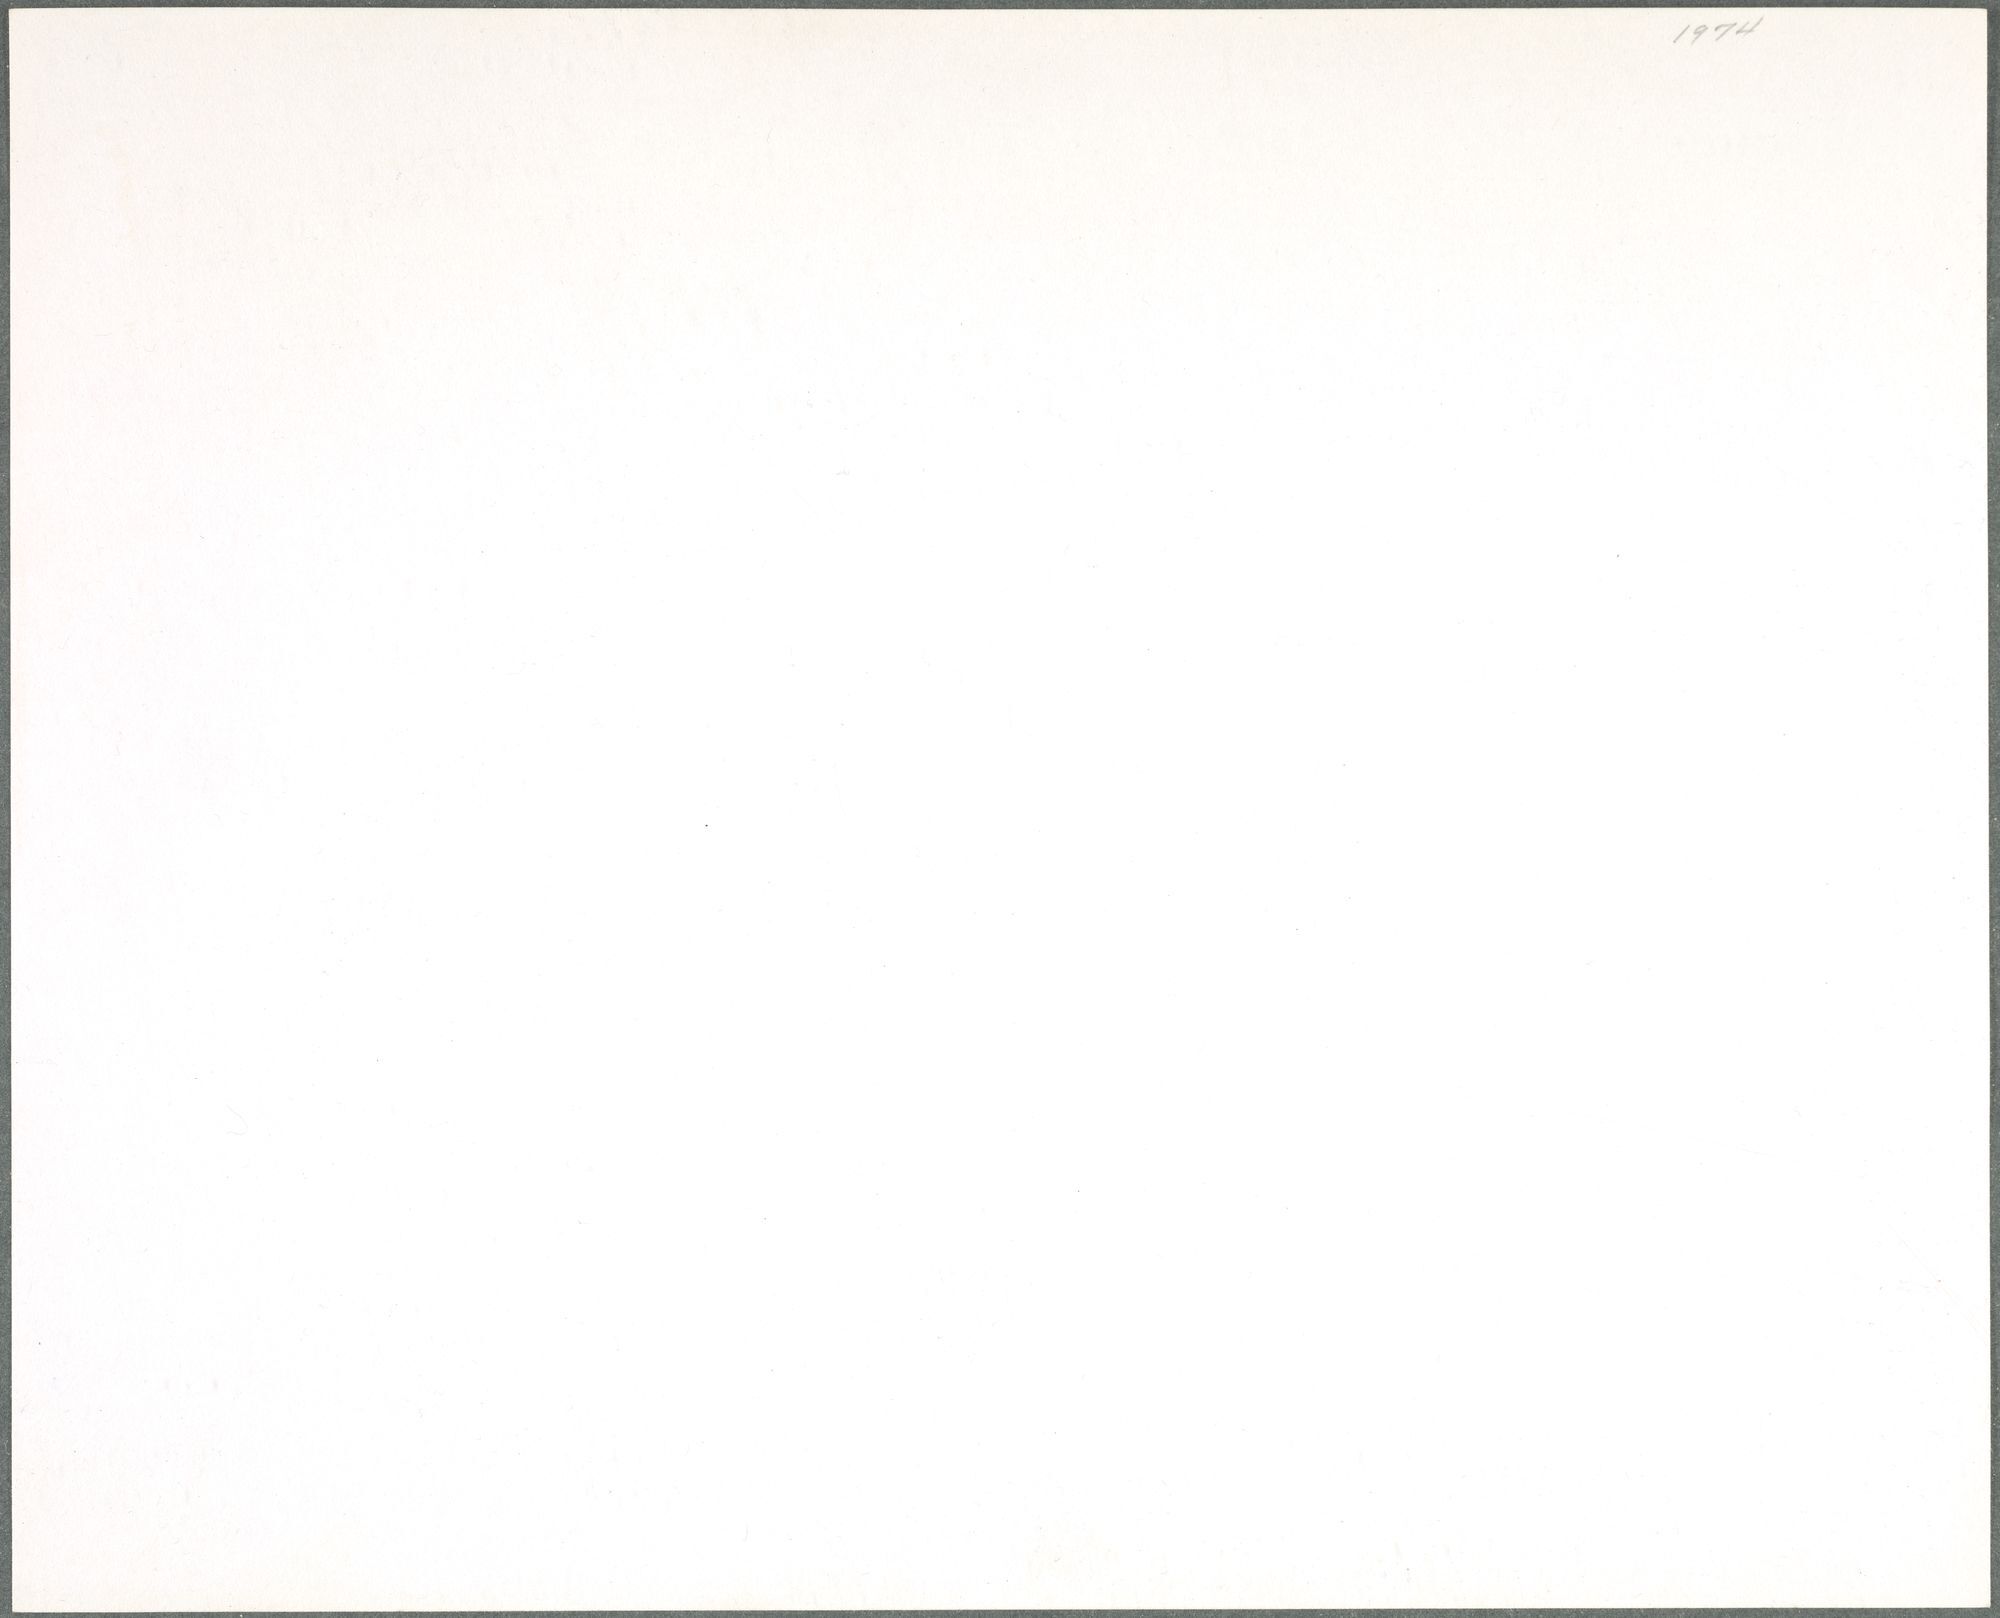 The blank back of a photograph.